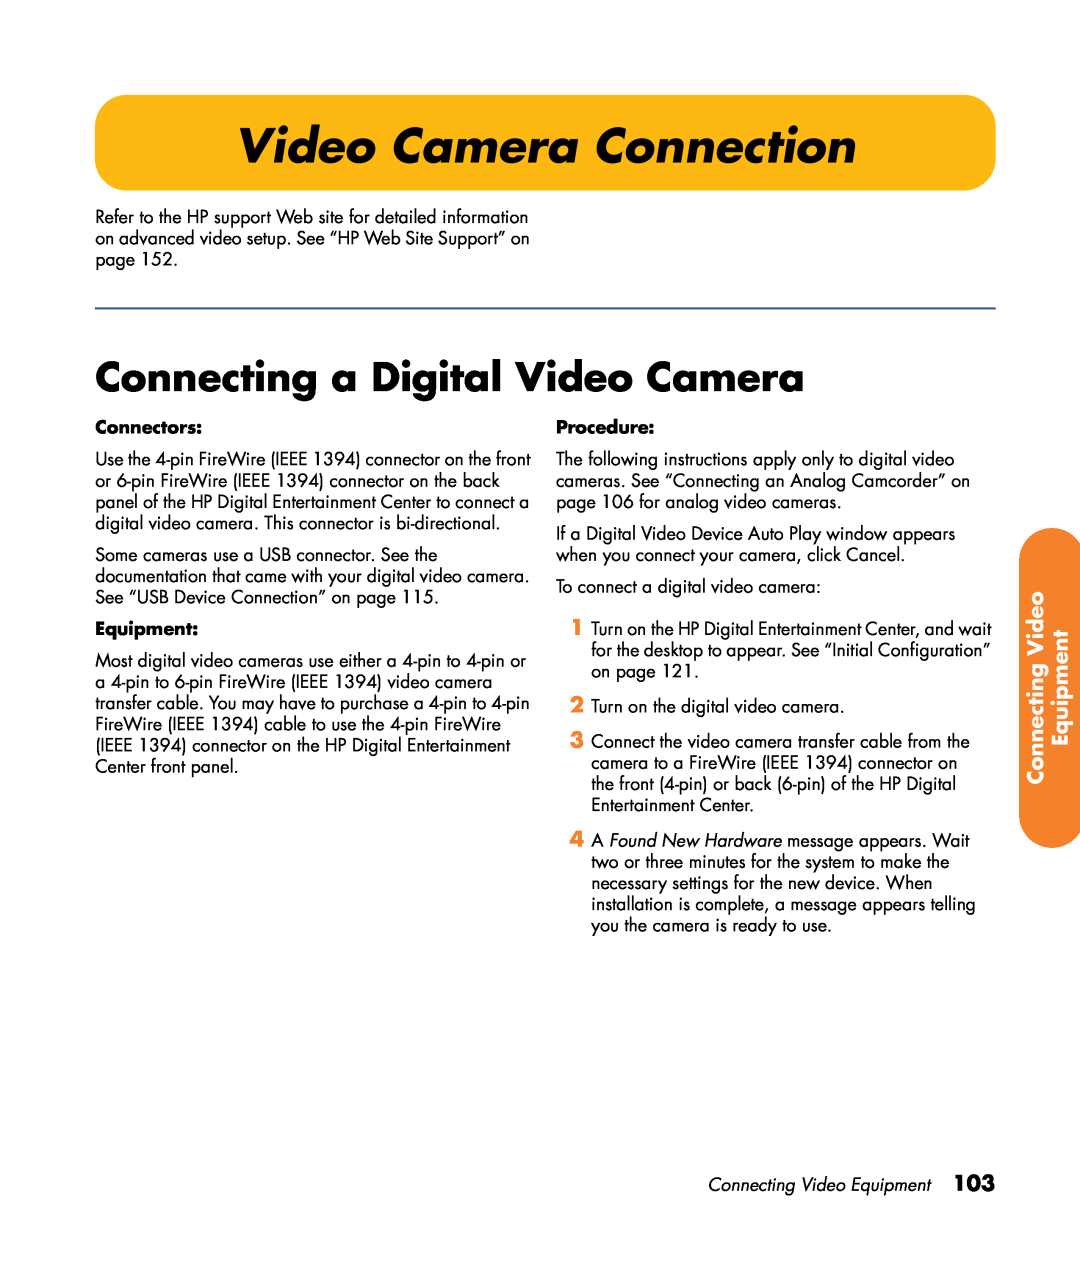 HP z540 Video Camera Connection, Connecting a Digital Video Camera, Connecting Video Equipment, Connectors, Procedure 